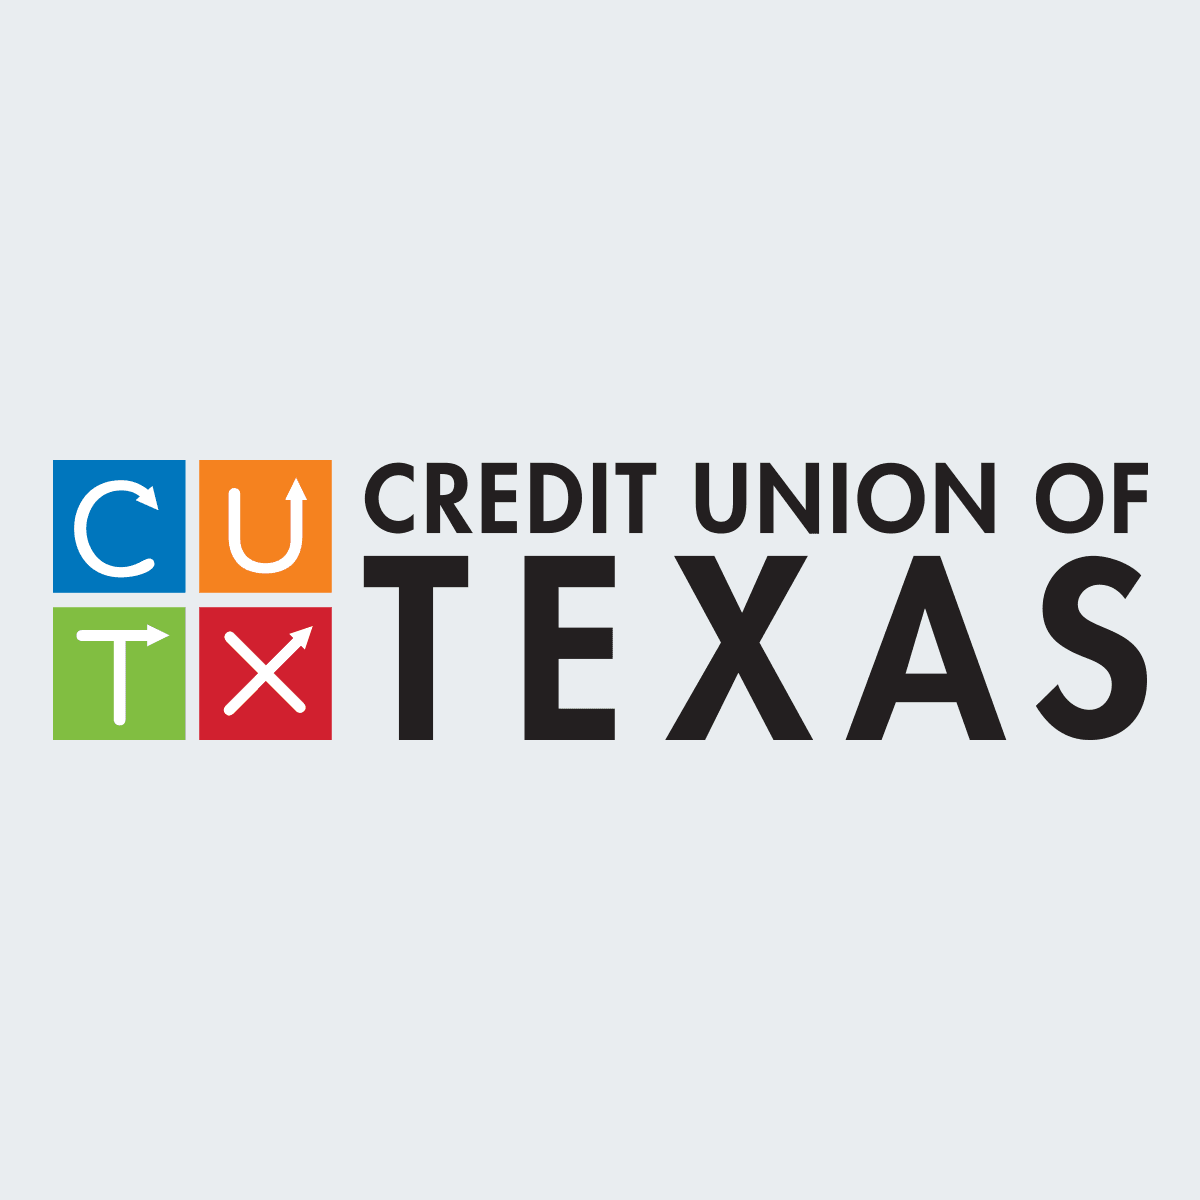 Credit Union of Texas: Yet Another Sitecore Success Story